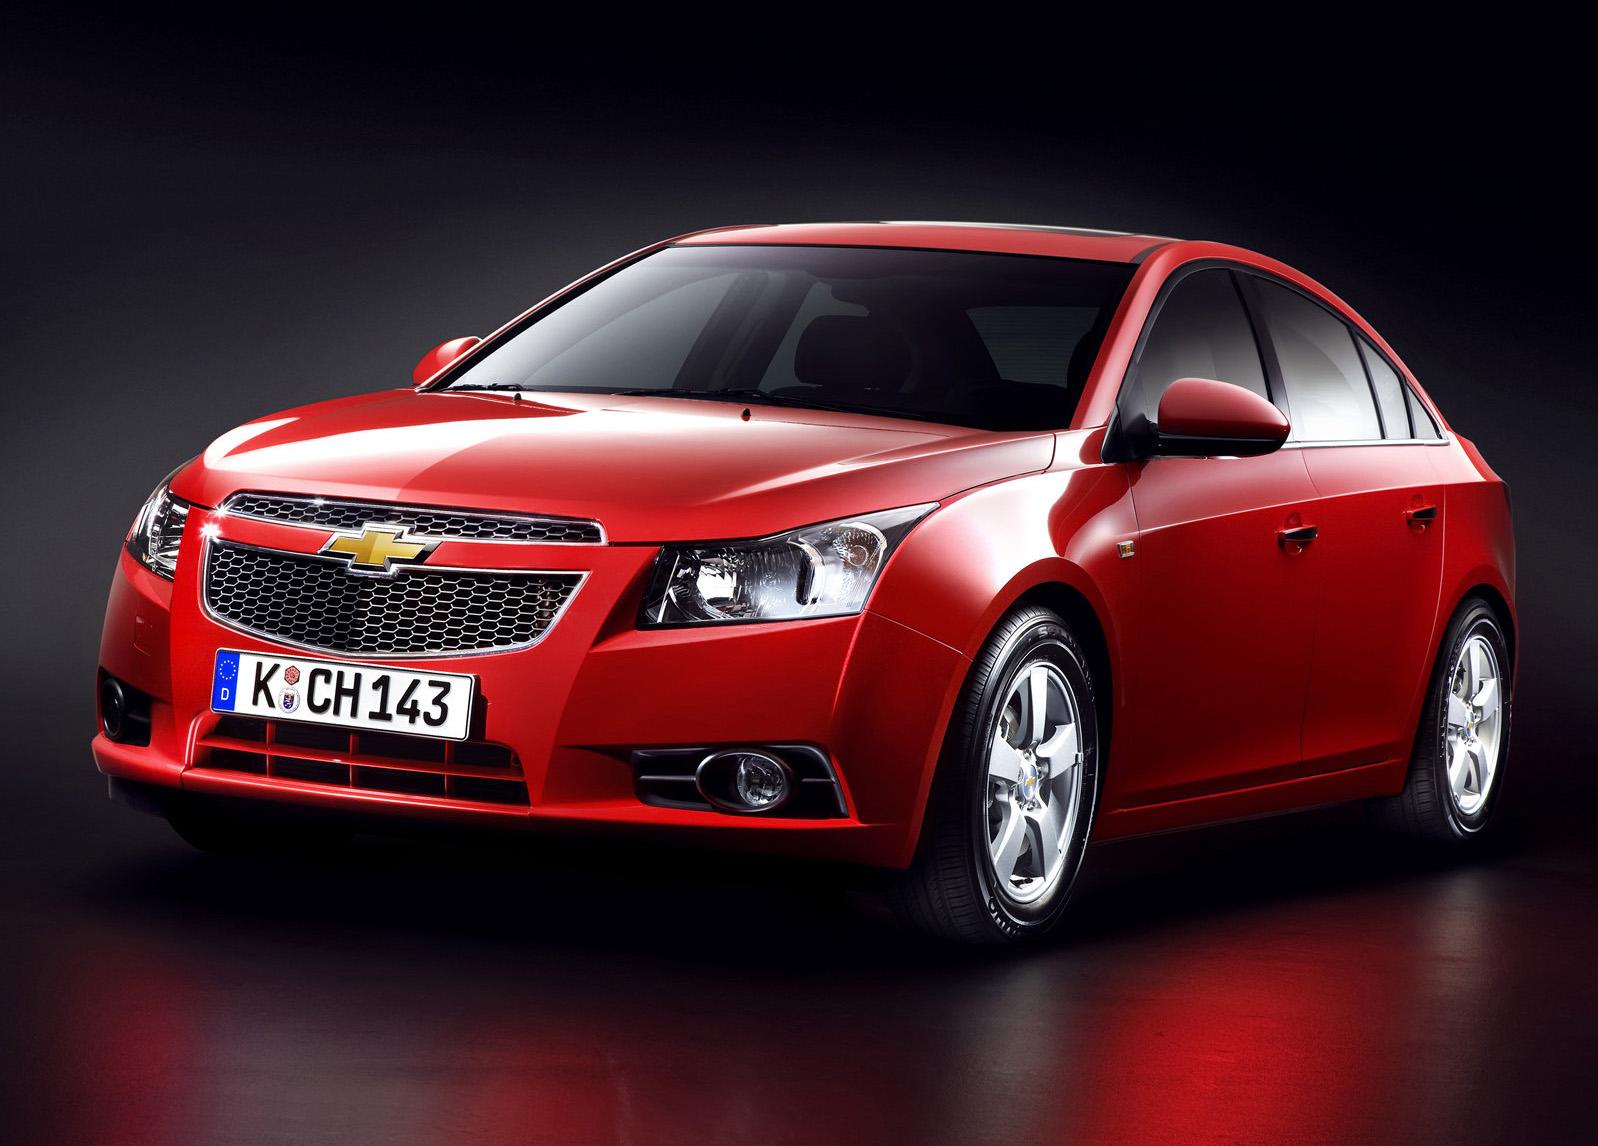 2009 Chevrolet Cruze News and Information